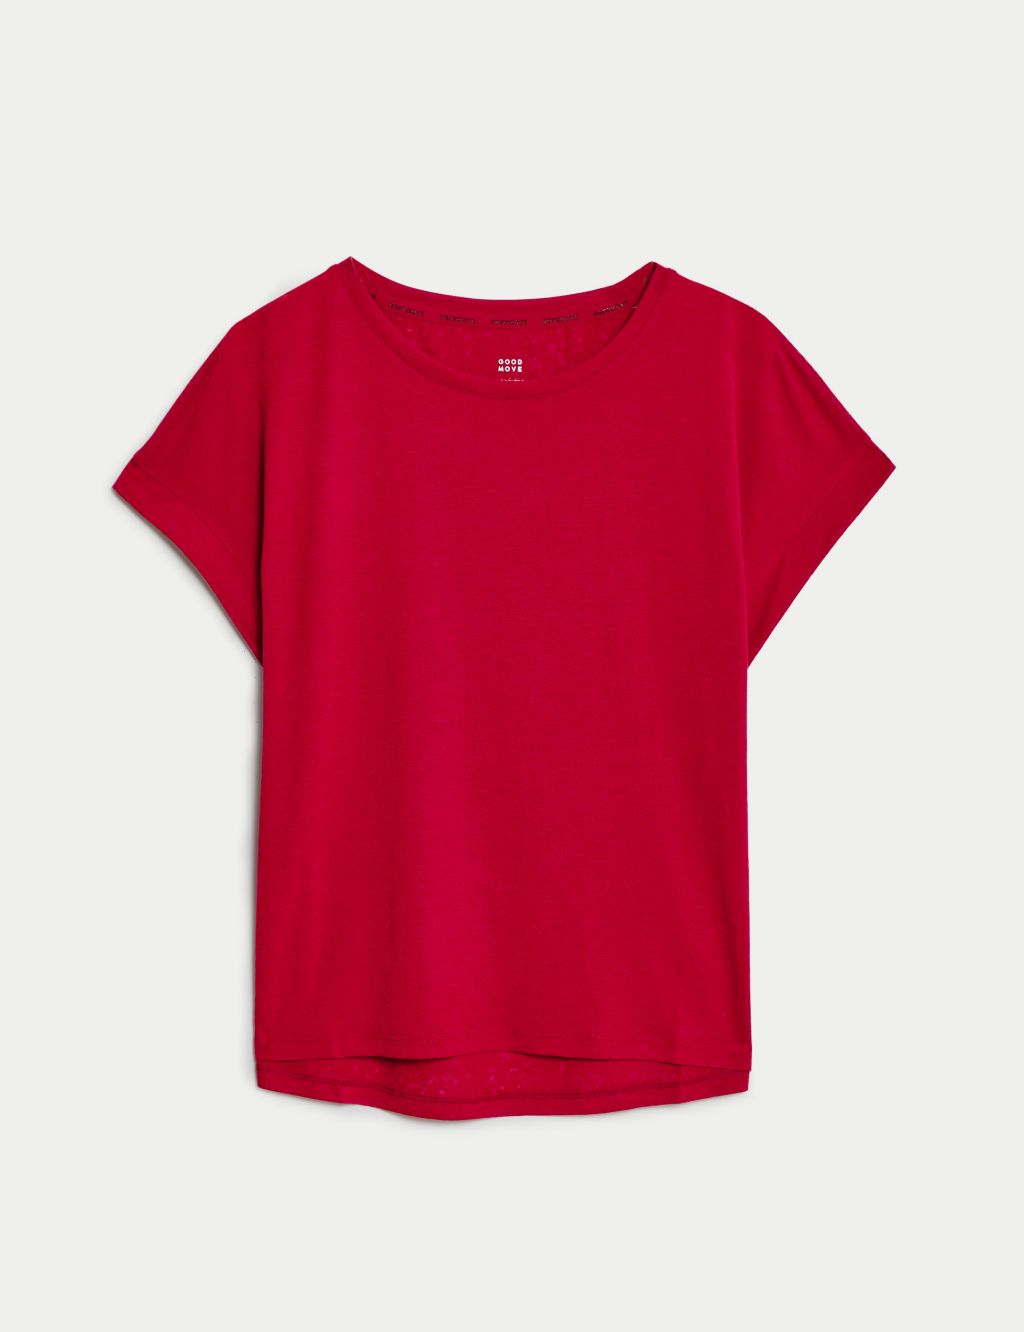 Lightweight Scoop Neck Relaxed T-Shirt image 2